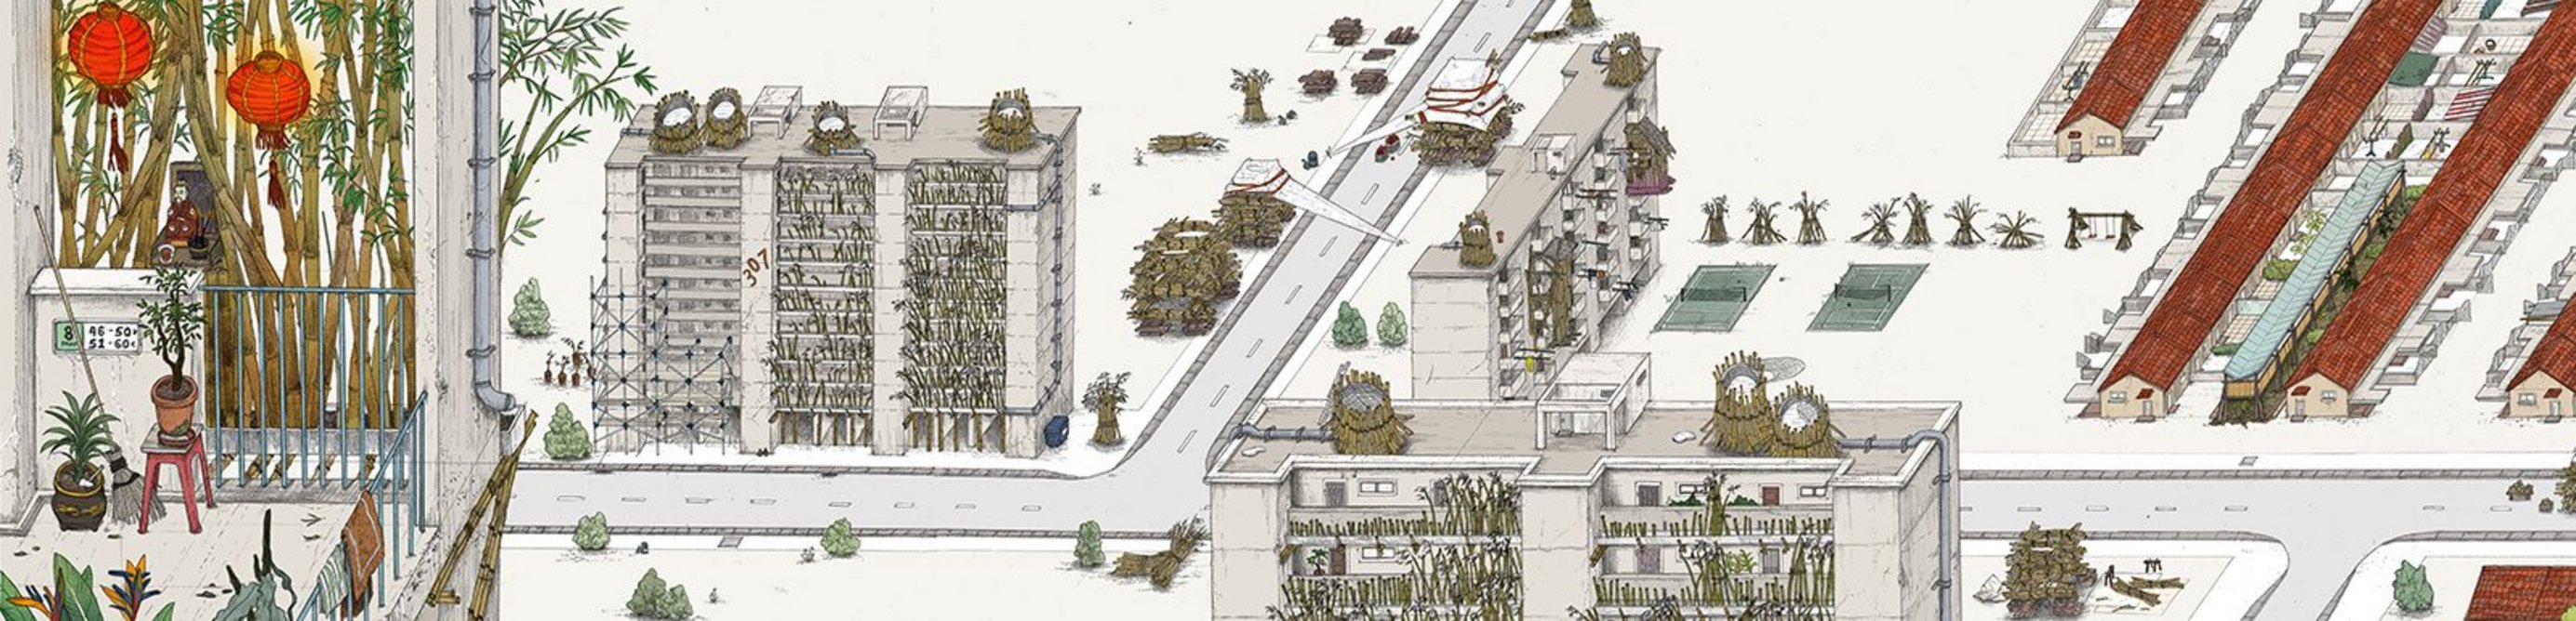 Annabelle Tan’s RIBA Dissertation Medal winning Past, Present and Post-Tropicality.